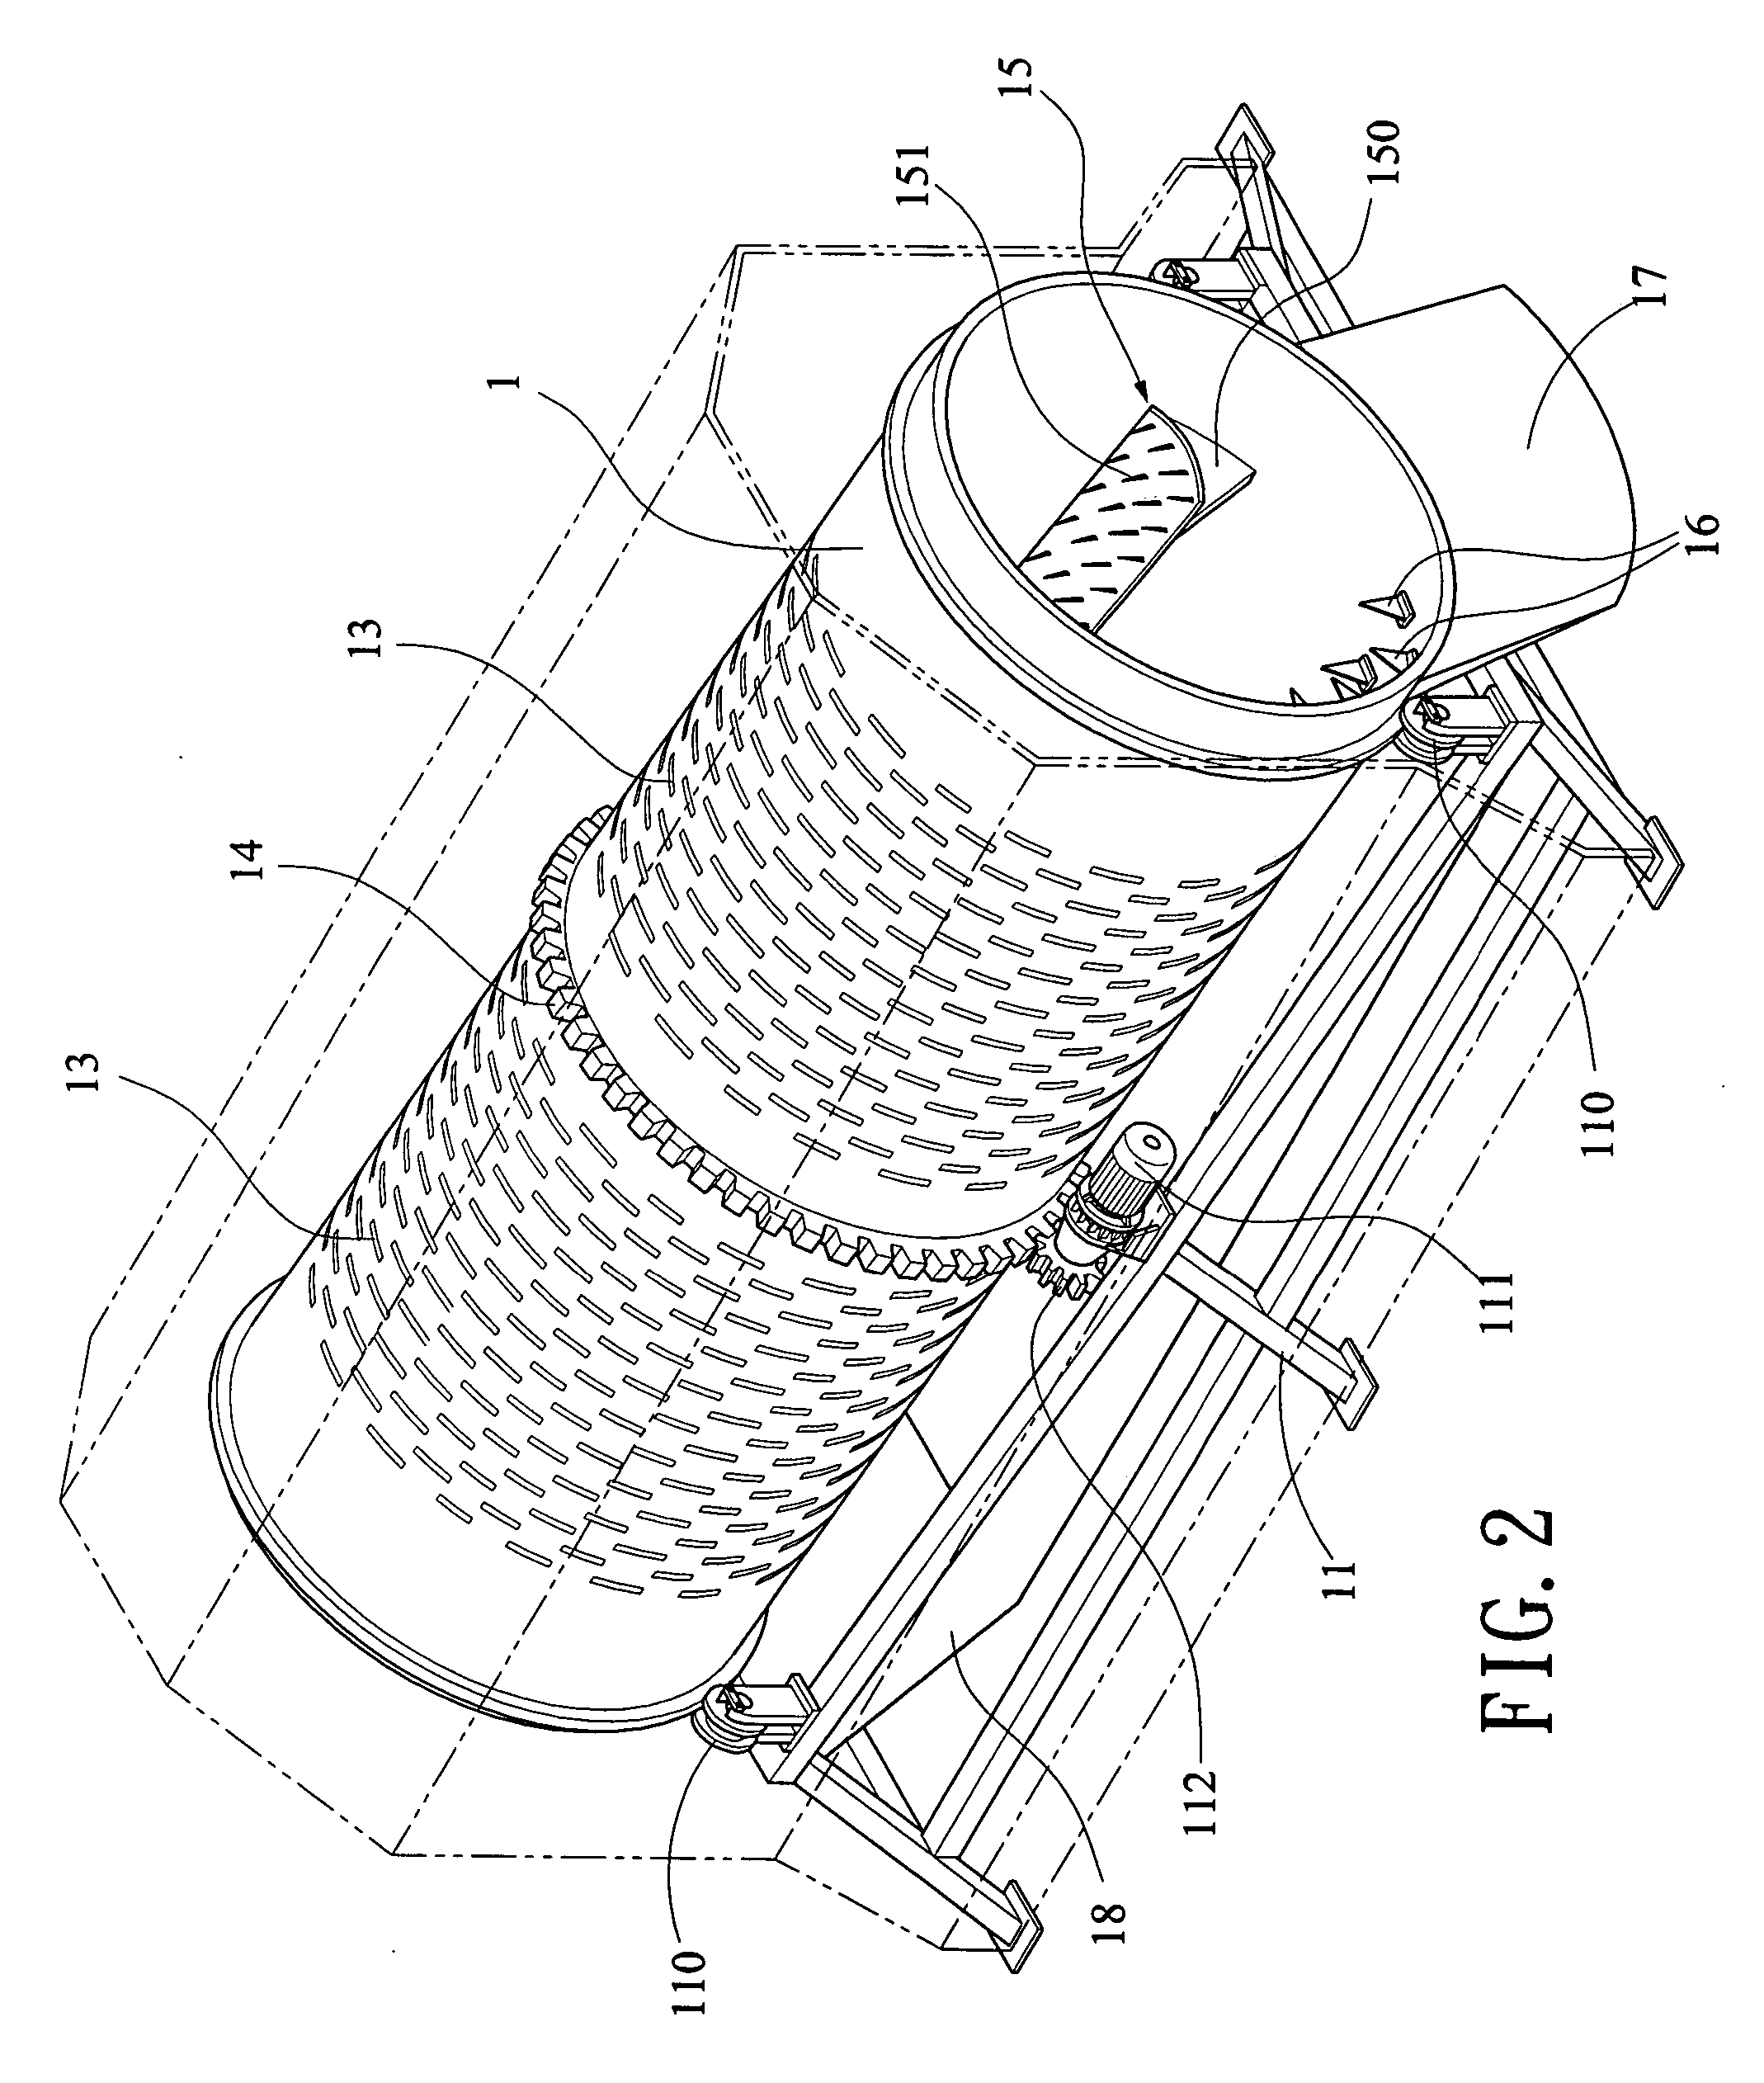 Apparatus for piercing garbage bags and collecting nonrigid, elongate objects and powder